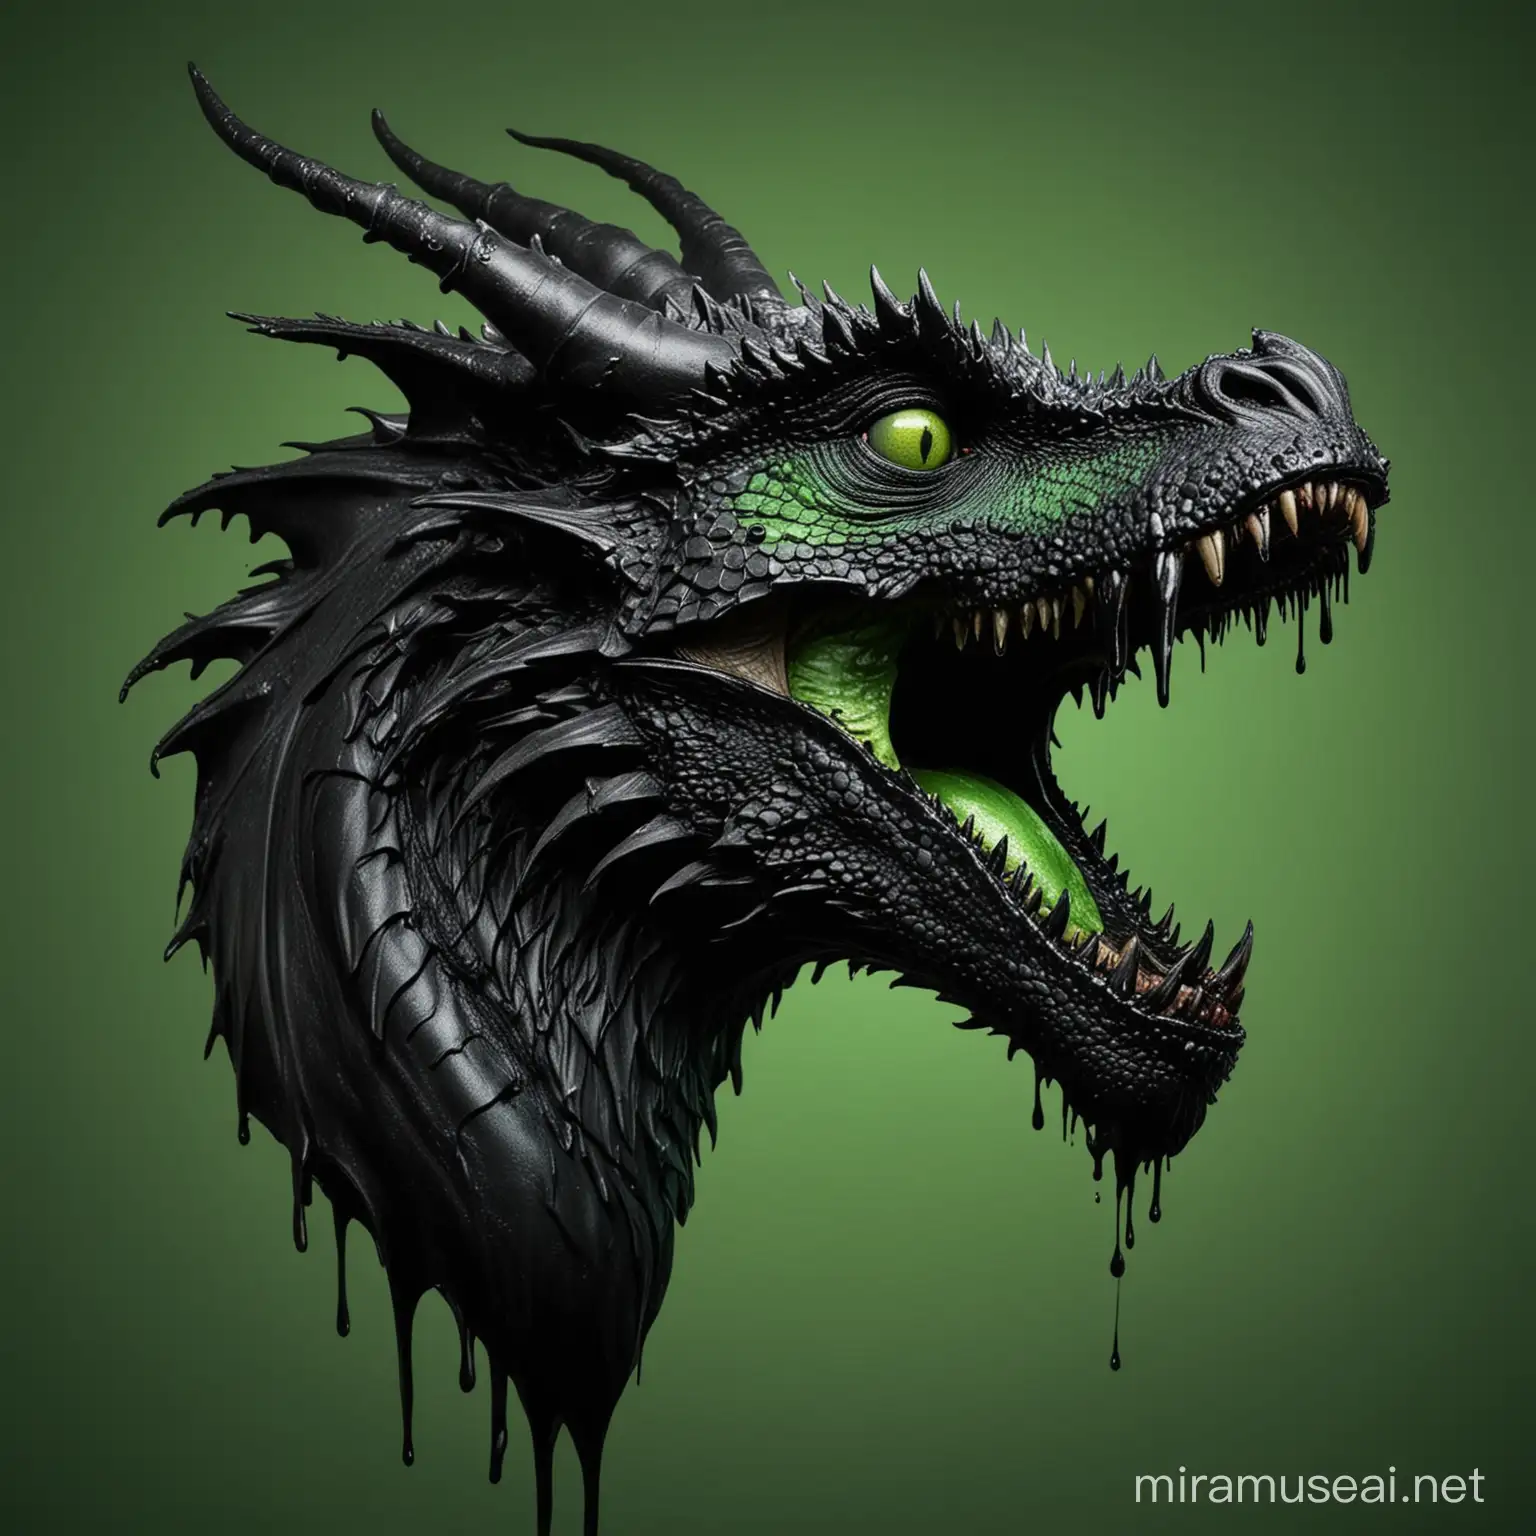 Sinister Gothic Dragon Black Goo Creature Roaring in Green Abyss